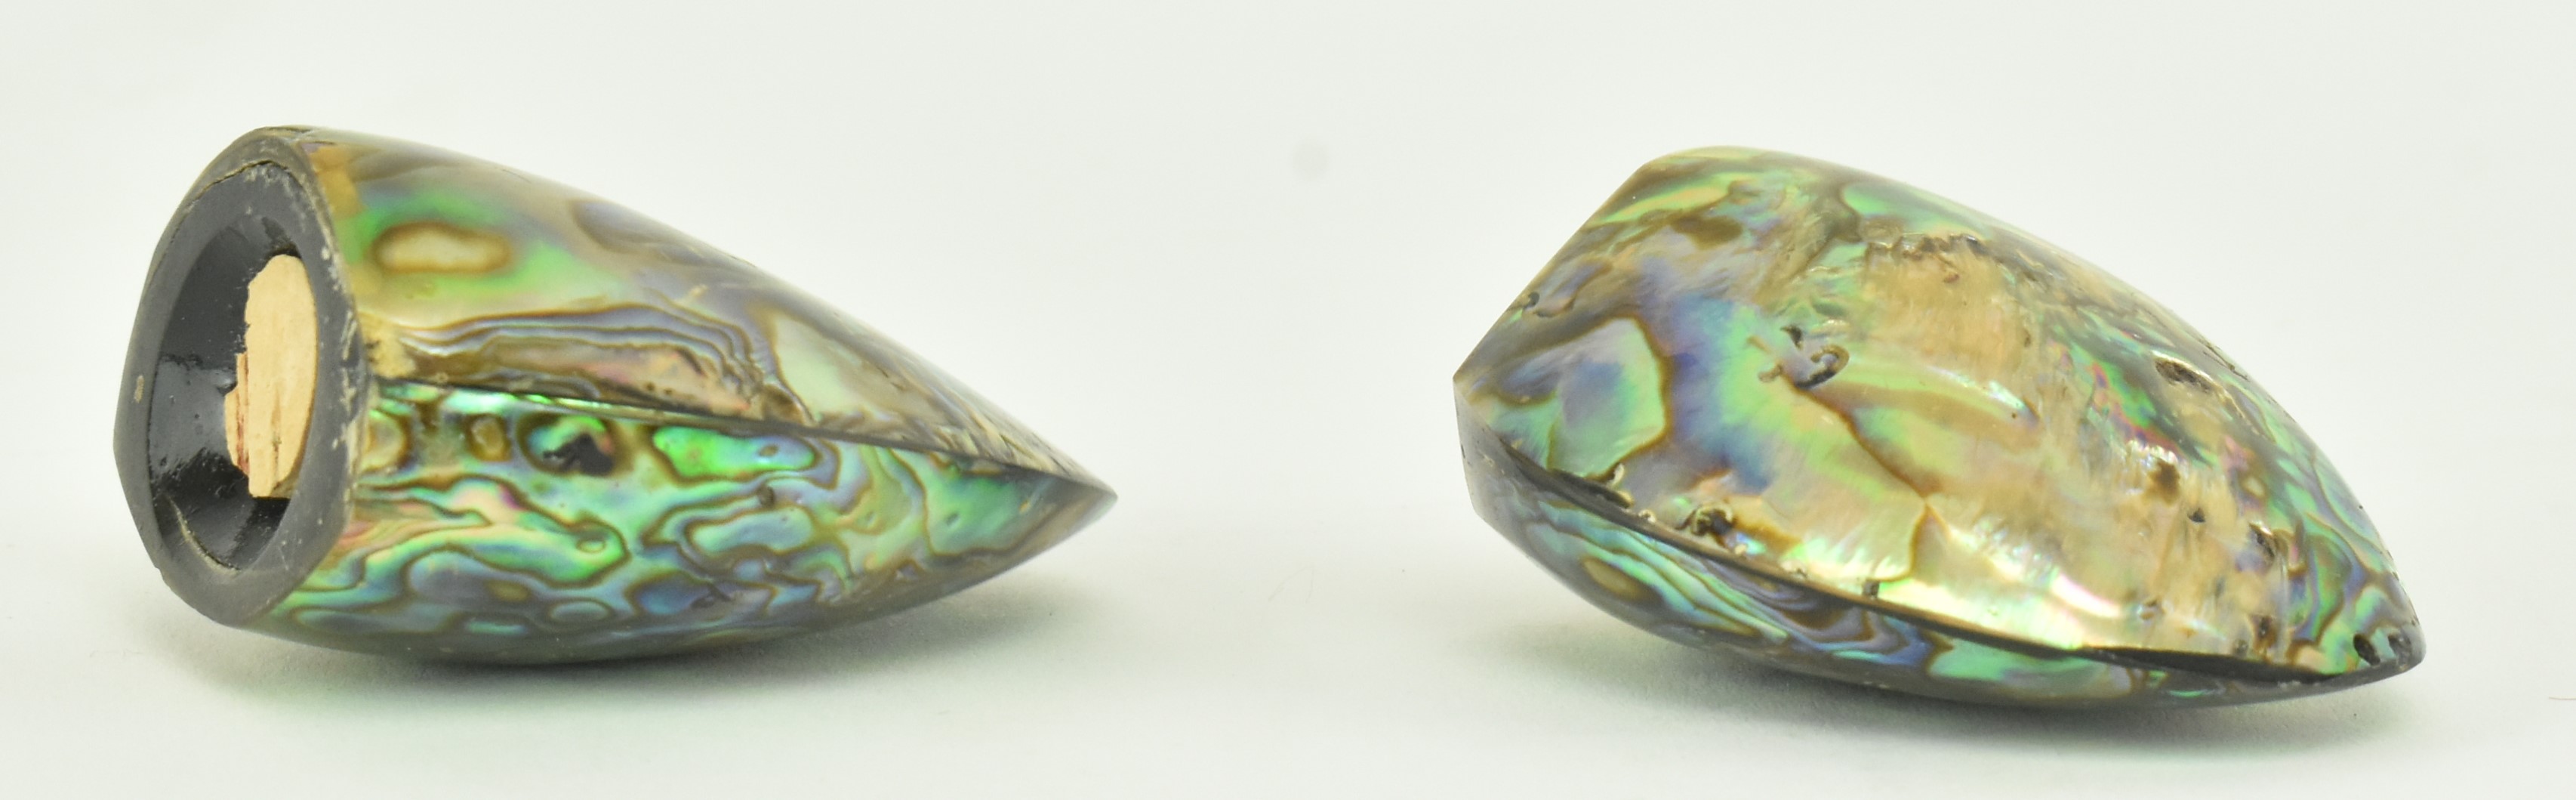 COLLECTION OF VINTAGE ABALONE ITEMS, INCL. SALT & PEPPER SHAKERS - Image 7 of 12